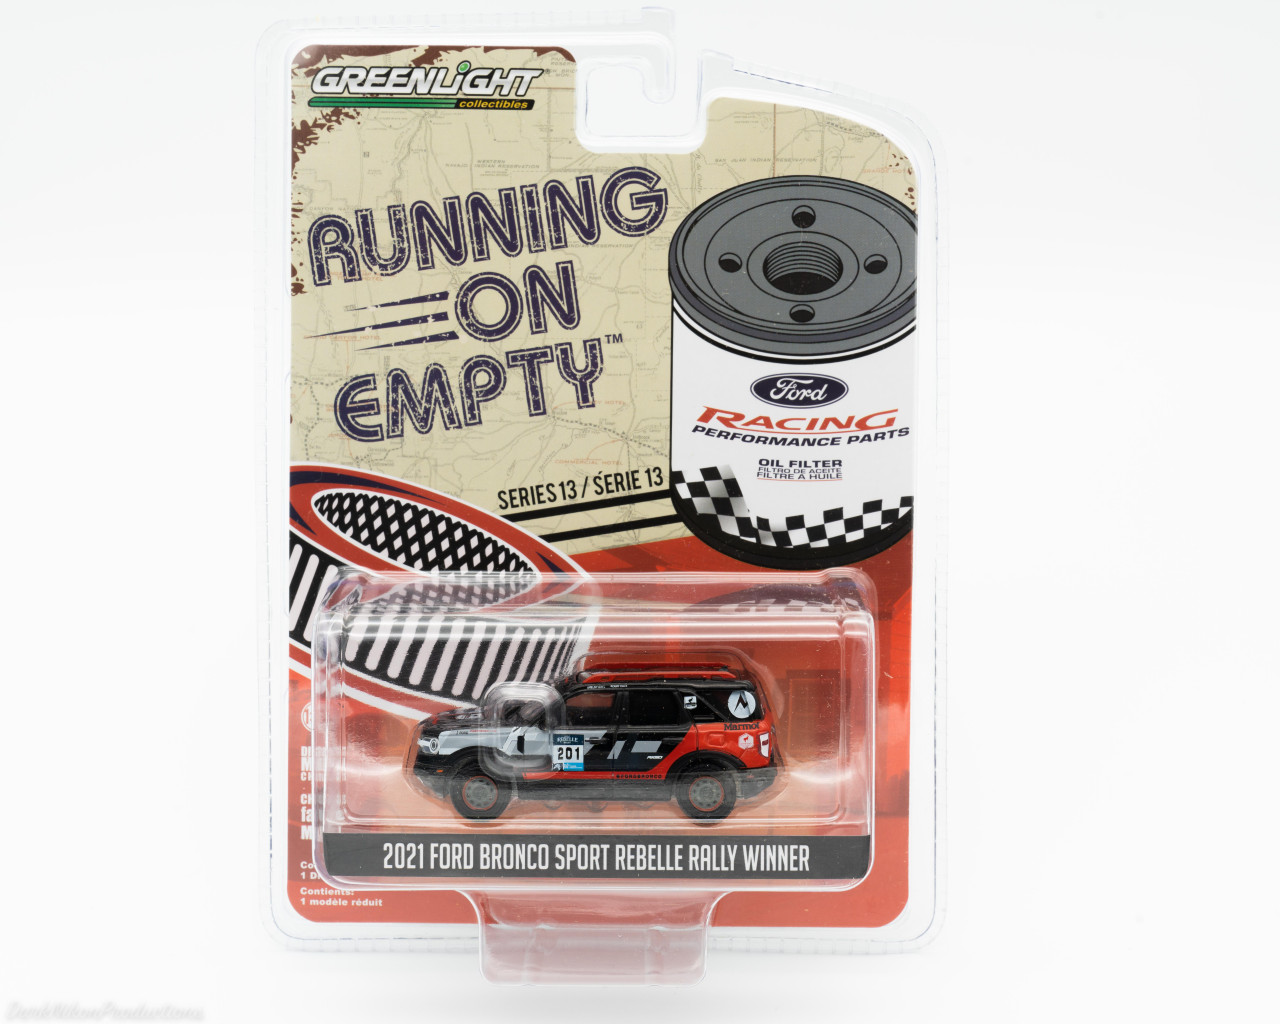 2021 Ford Bronco Sport #201 Rebelle Rally Winner - Ford Performance 1:64 Scale Diecast Replica Model by Greenlight